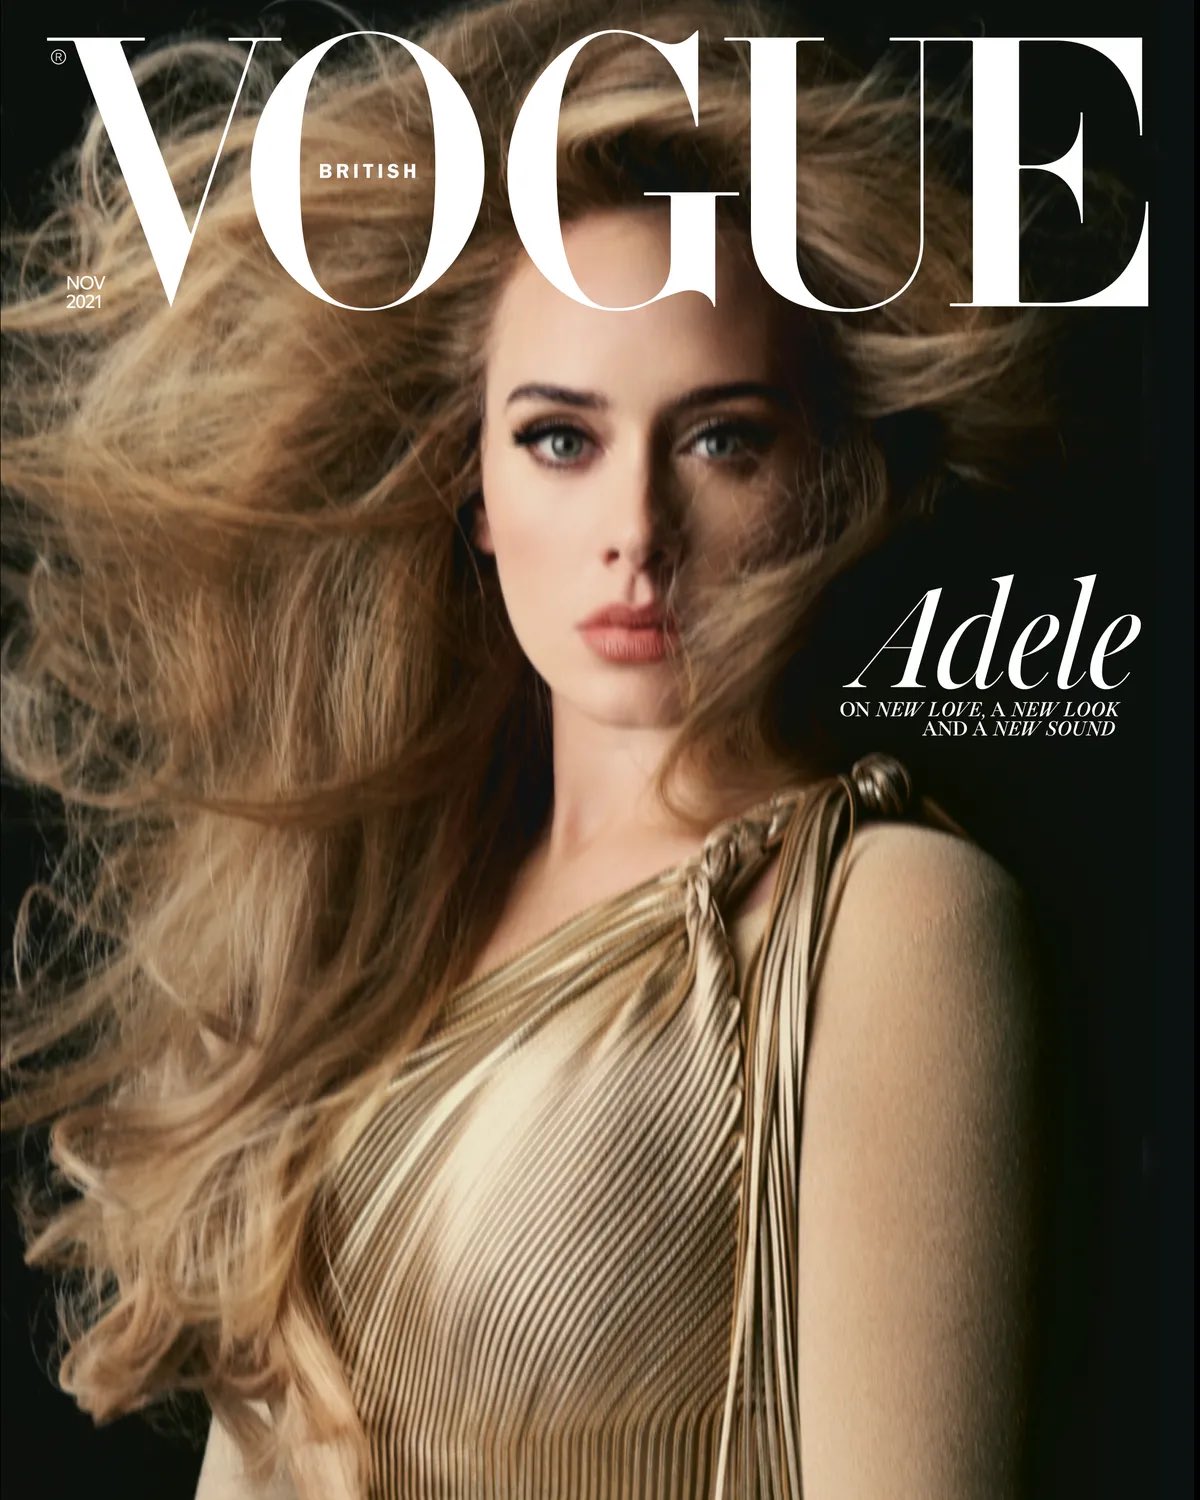 Adele covers both American and British Vogue complete with two separate